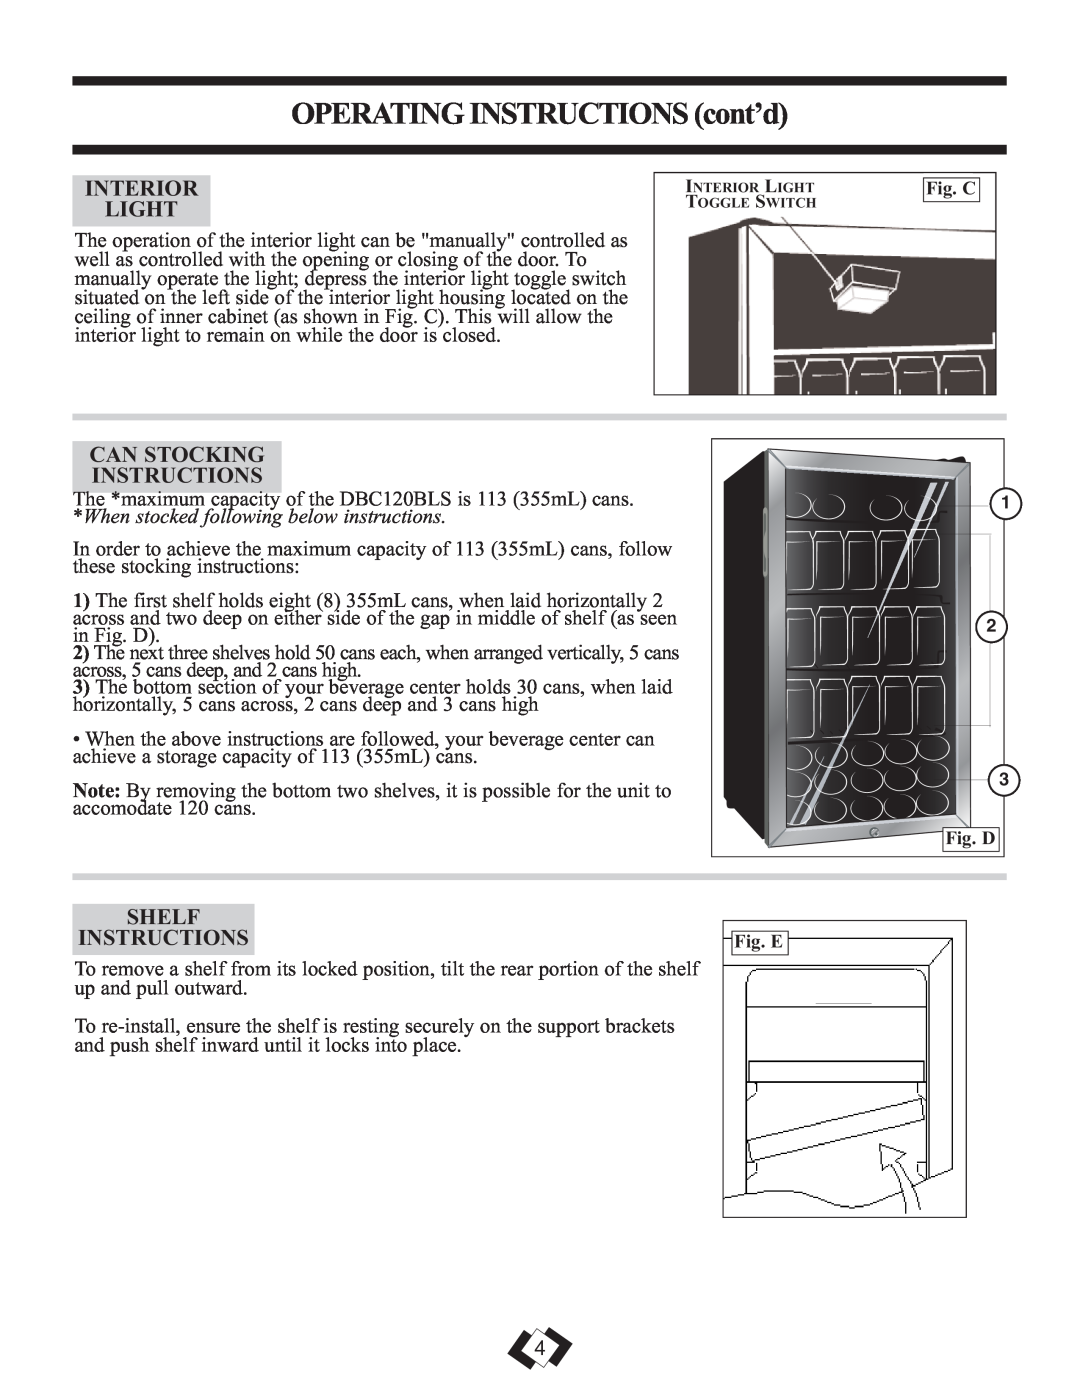 Danby DBC120BLS warranty OPERATING INSTRUCTIONS cont’d, Interior Light, Can Stocking Instructions, Shelf Instructions 